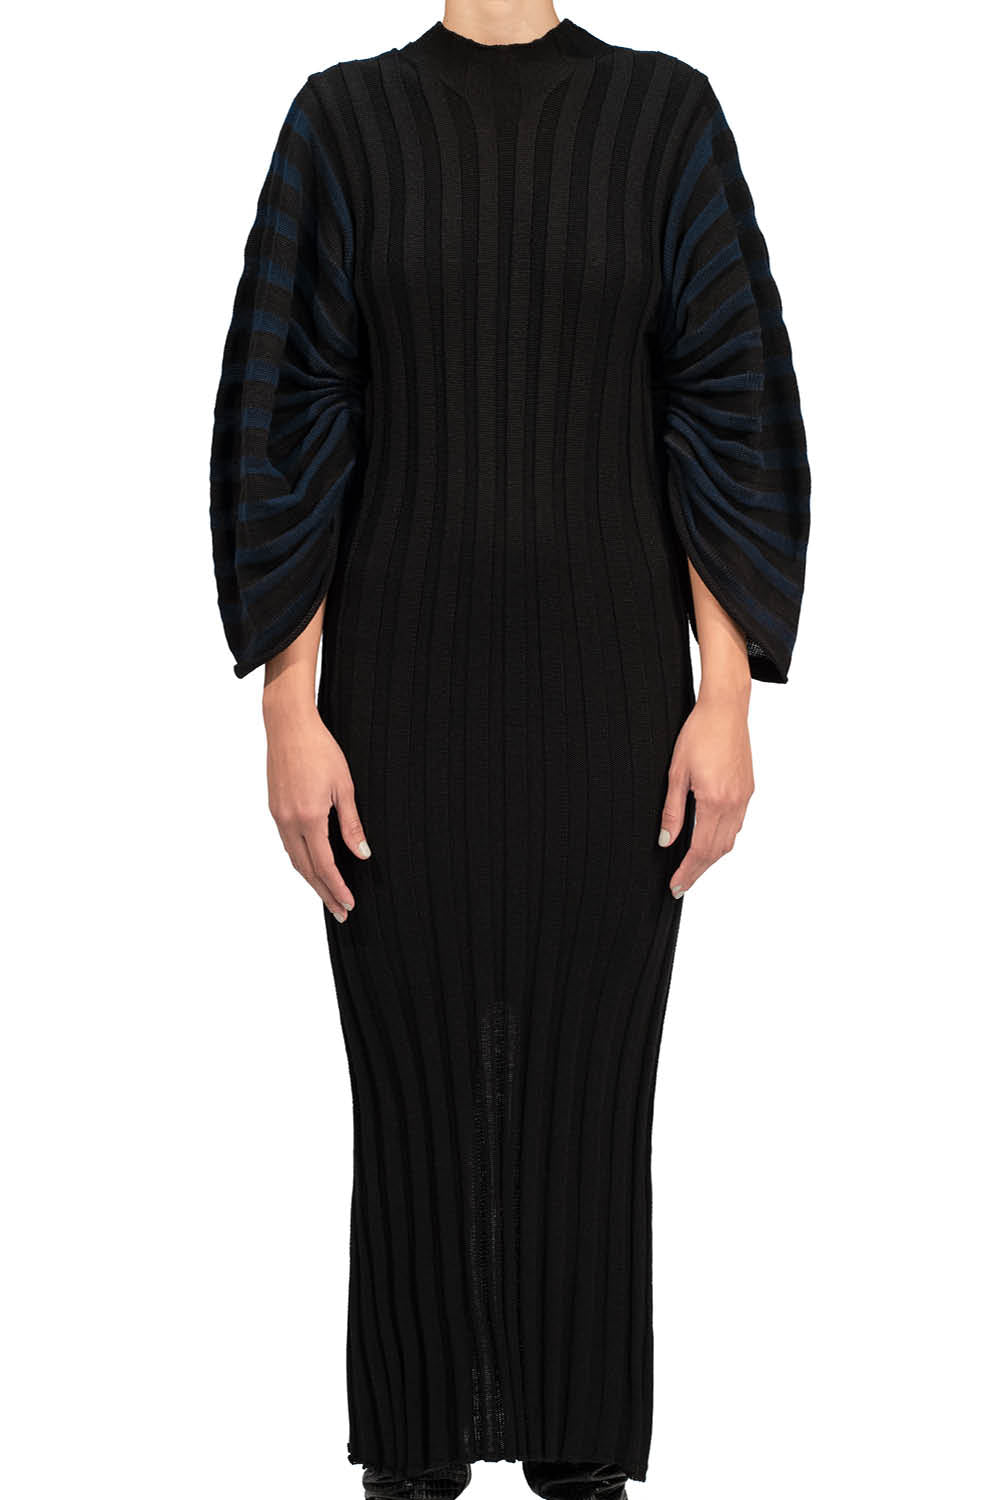 TWO TONE KNITTED RIBBED DRESS BLACK/BLUE